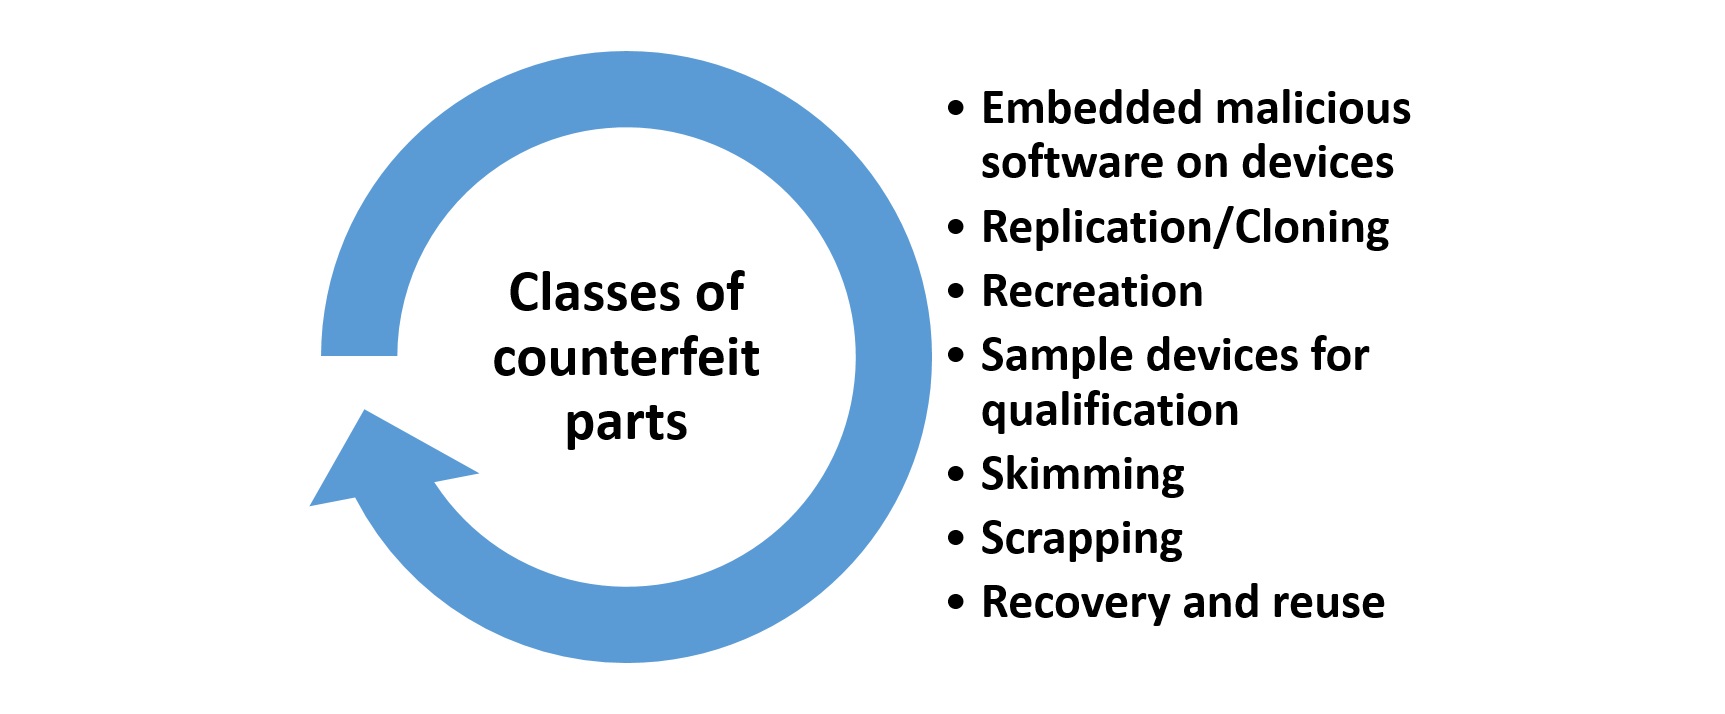 classes of counterfeit components.jpg